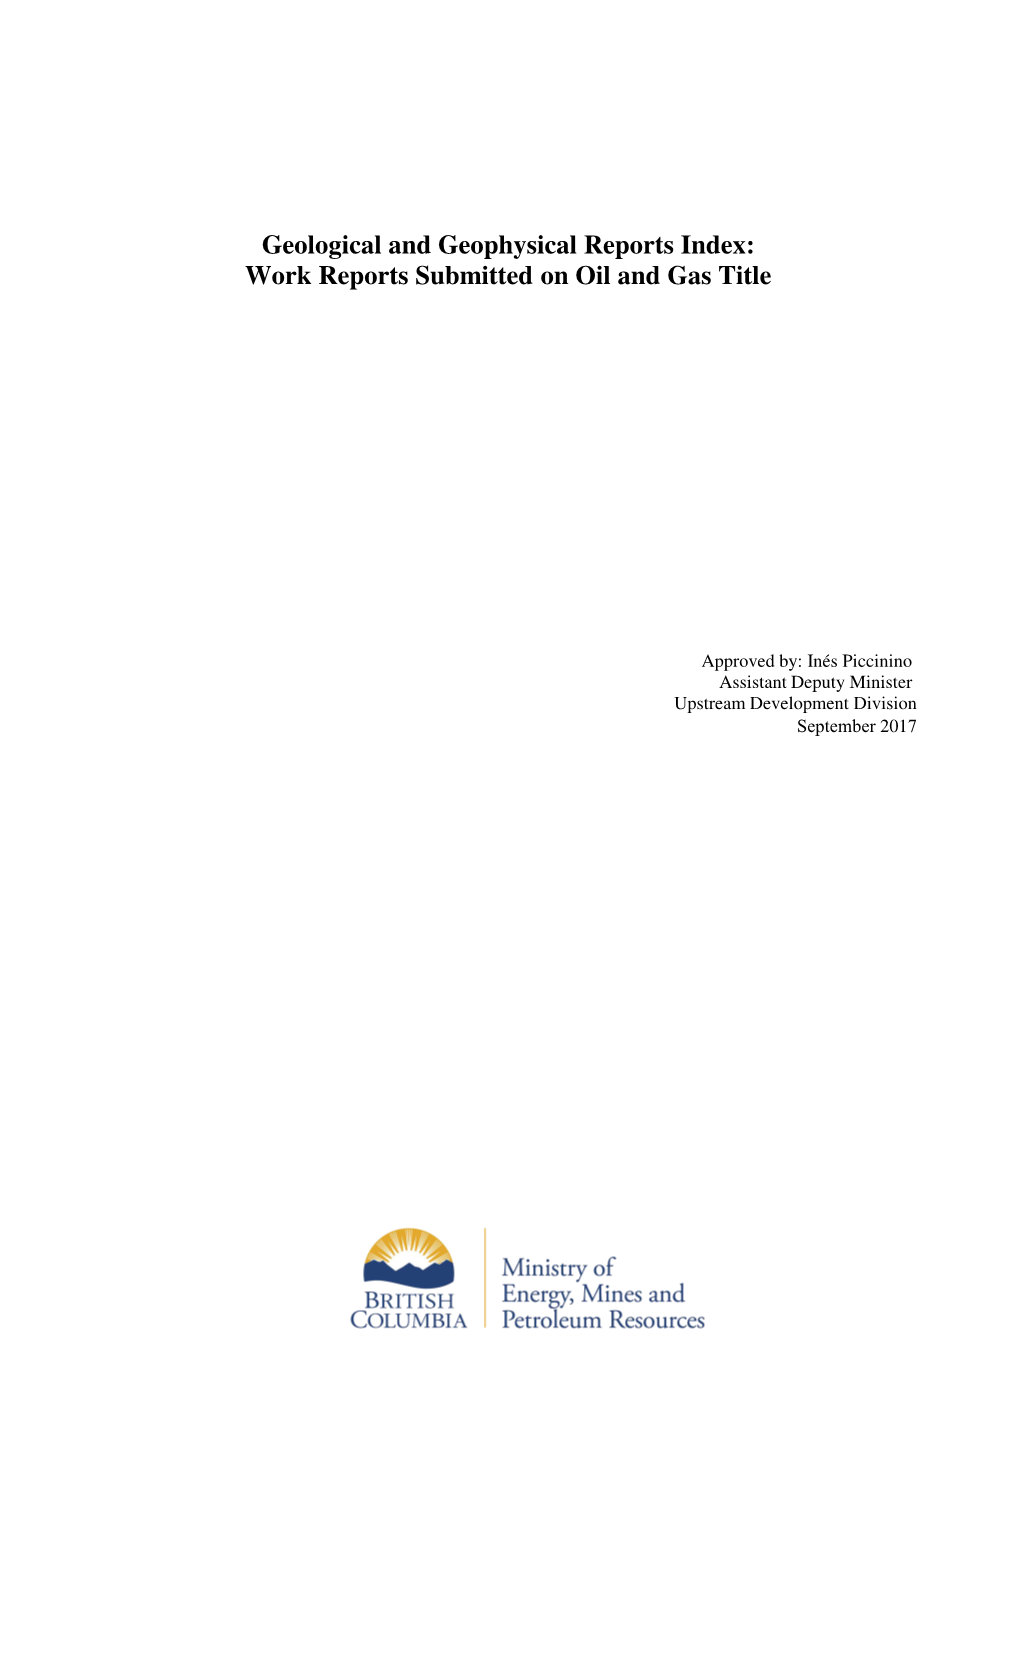 Geological and Geophysical Reports Index: Work Reports Submitted on Oil and Gas Title